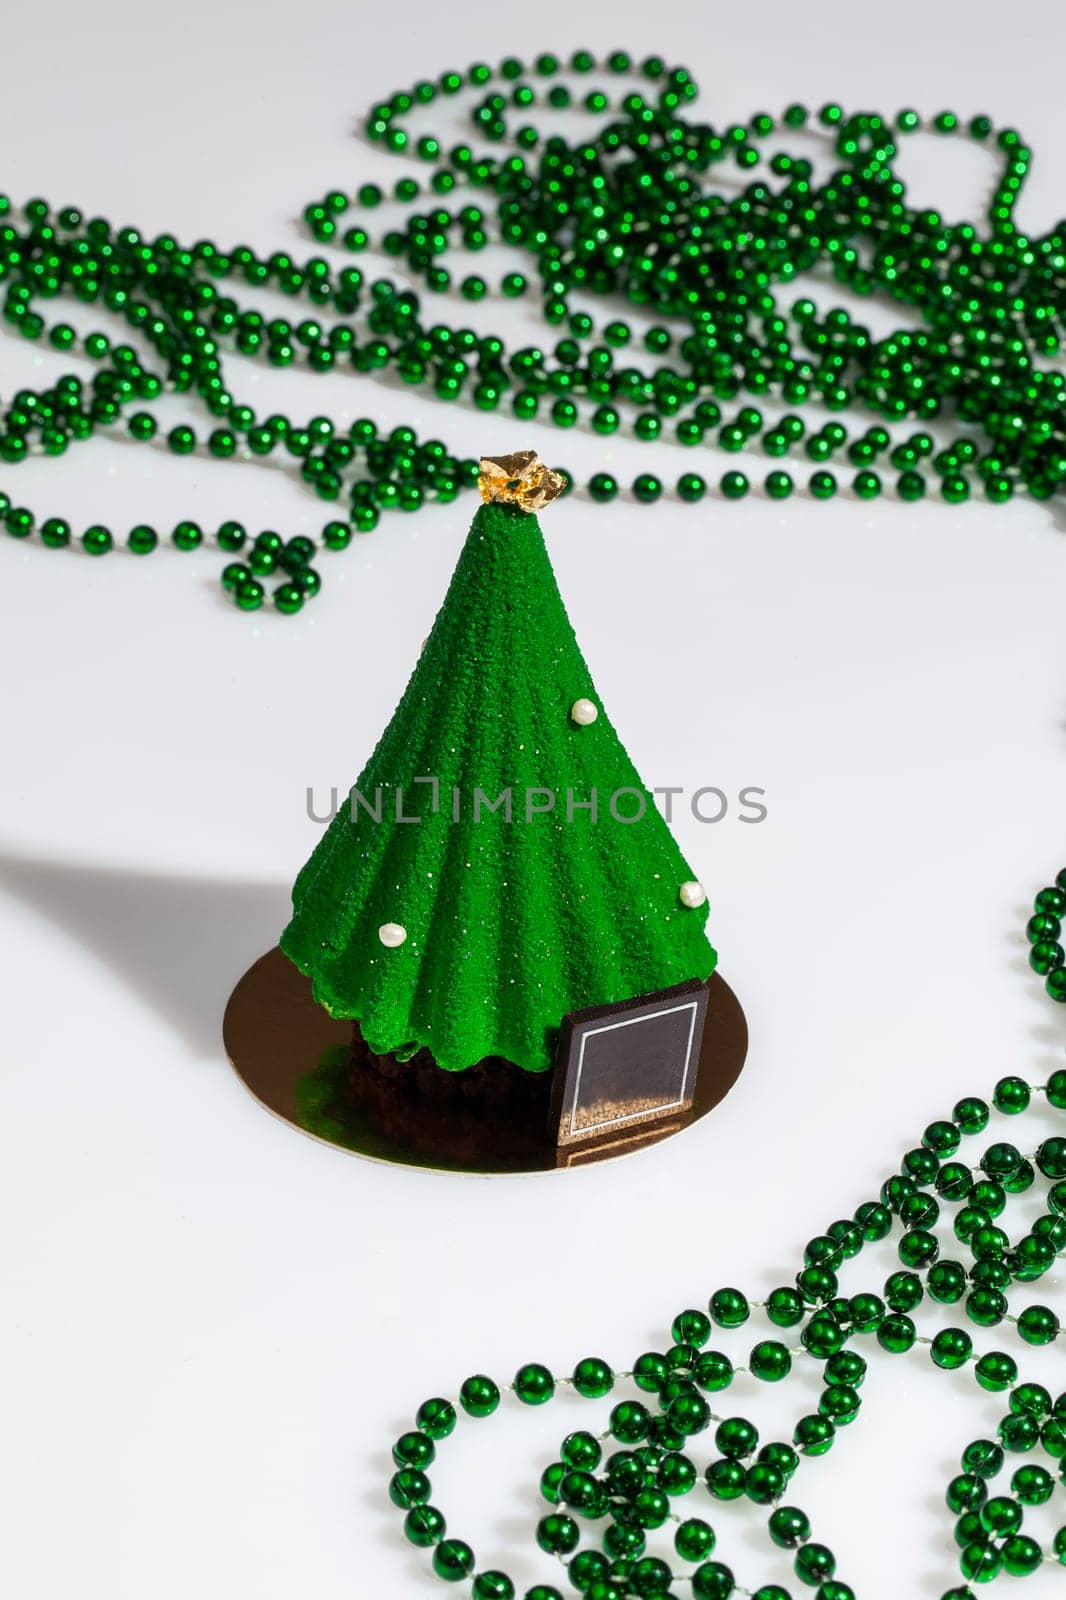 Christmas tree shaped pastry covered with scabrous green icing with golden topper and sugar drops on white background with strings of green beads. Festive decor and treats. Handmade authors dessert